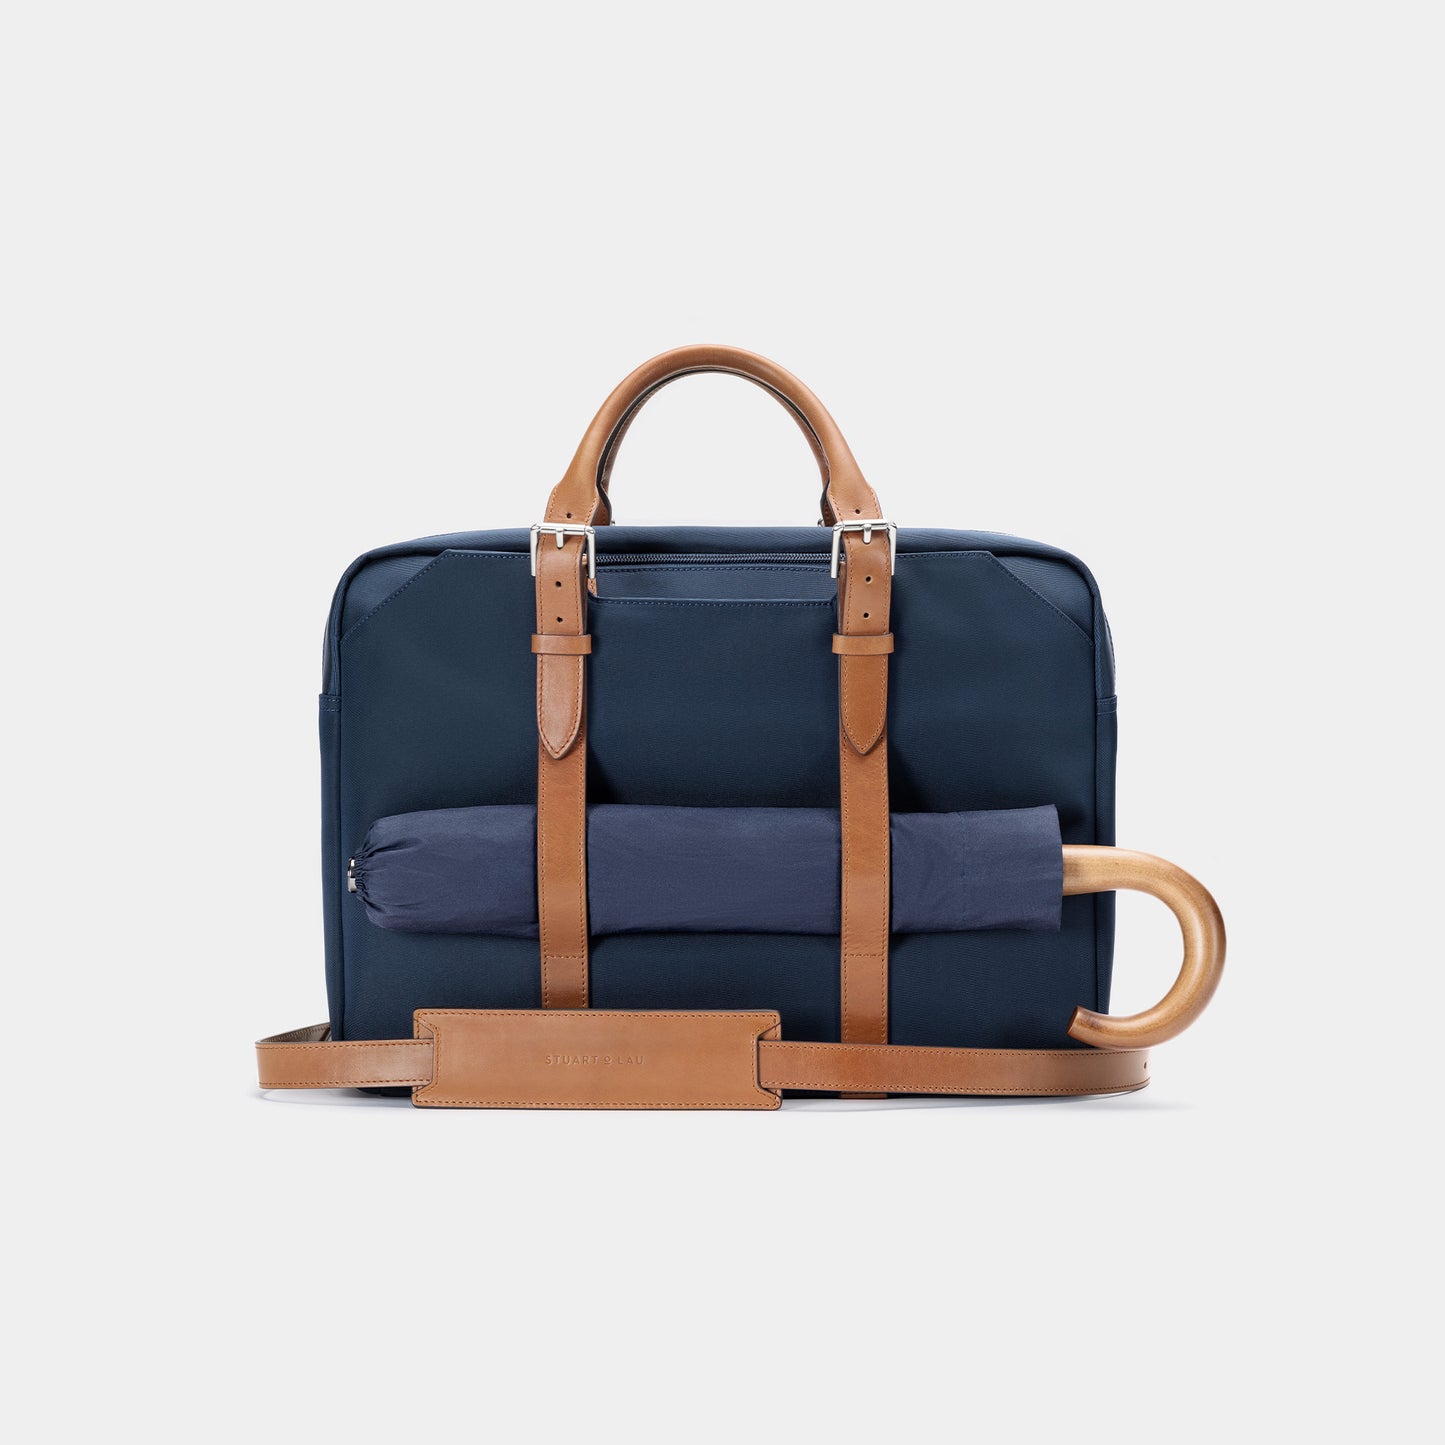 Cary Briefcase - Gen 2 - Slim - Navy and Tan